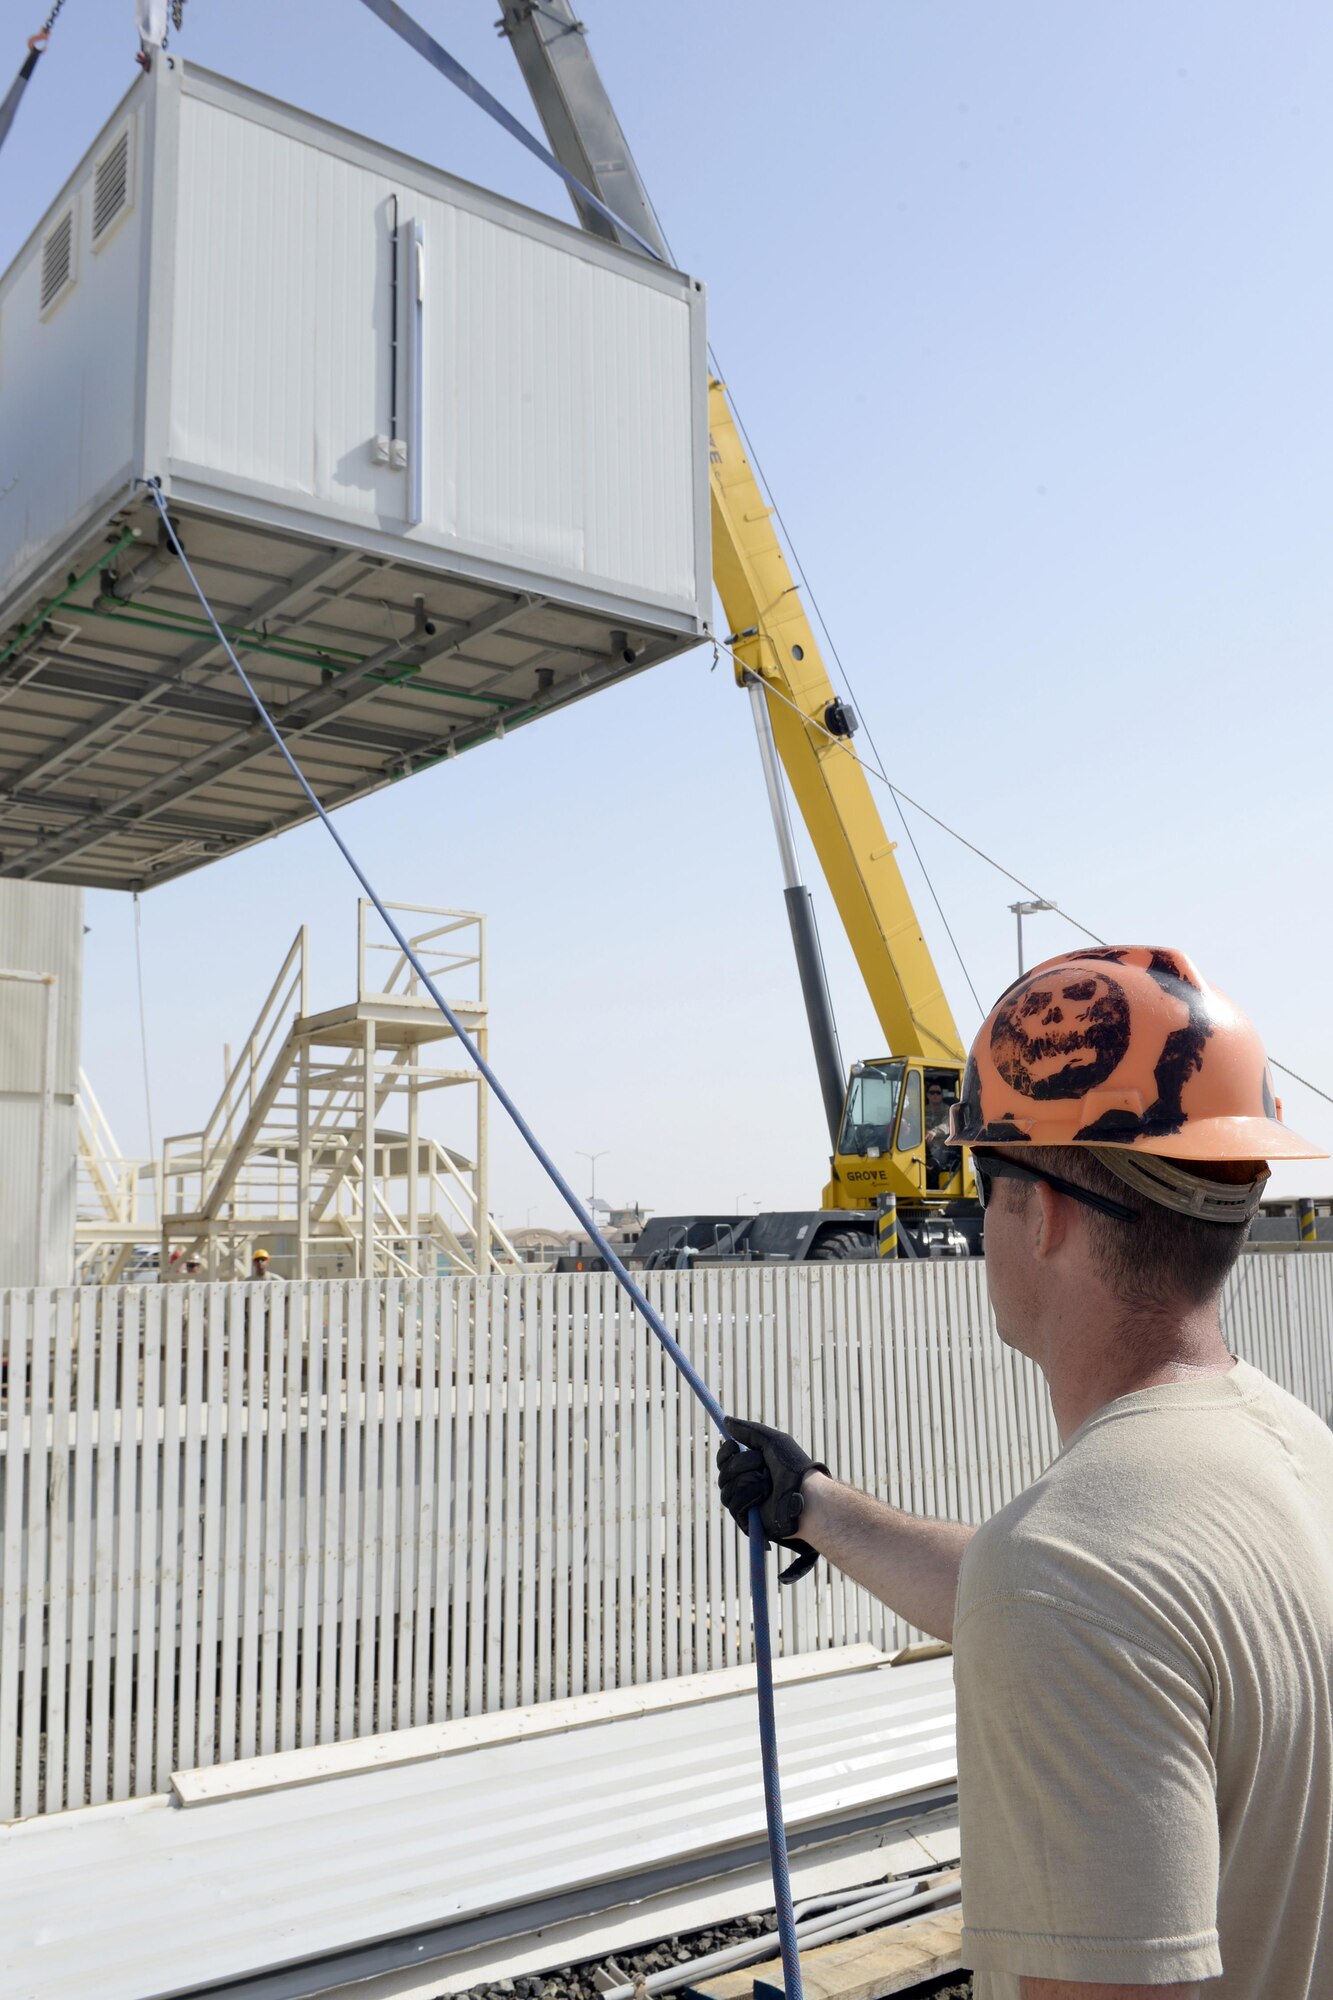 Airman 1st Class Randy, Expeditionary Prime Base Engineer Emergency Force Squadron electrician, assists with lowering a new shower Cadillac into place at an undisclosed location in Southwest Asia Mar. 4, 2015. The EPBS has been working on a variety of projects consisting of a security fence extending around the airfield, replacing about $280K worth of new showers in the Army barracks as well as constructing a 13.5 foot by eight foot, 12 inch thick concrete vault for the Communications Squadron. Randy is currently deployed from the 174th Civil Engineer Squadron out of Hancock Field, Syracuse, N.Y. (U.S. Air Force photo/Tech. Sgt. Marie Brown) (RELEASED)